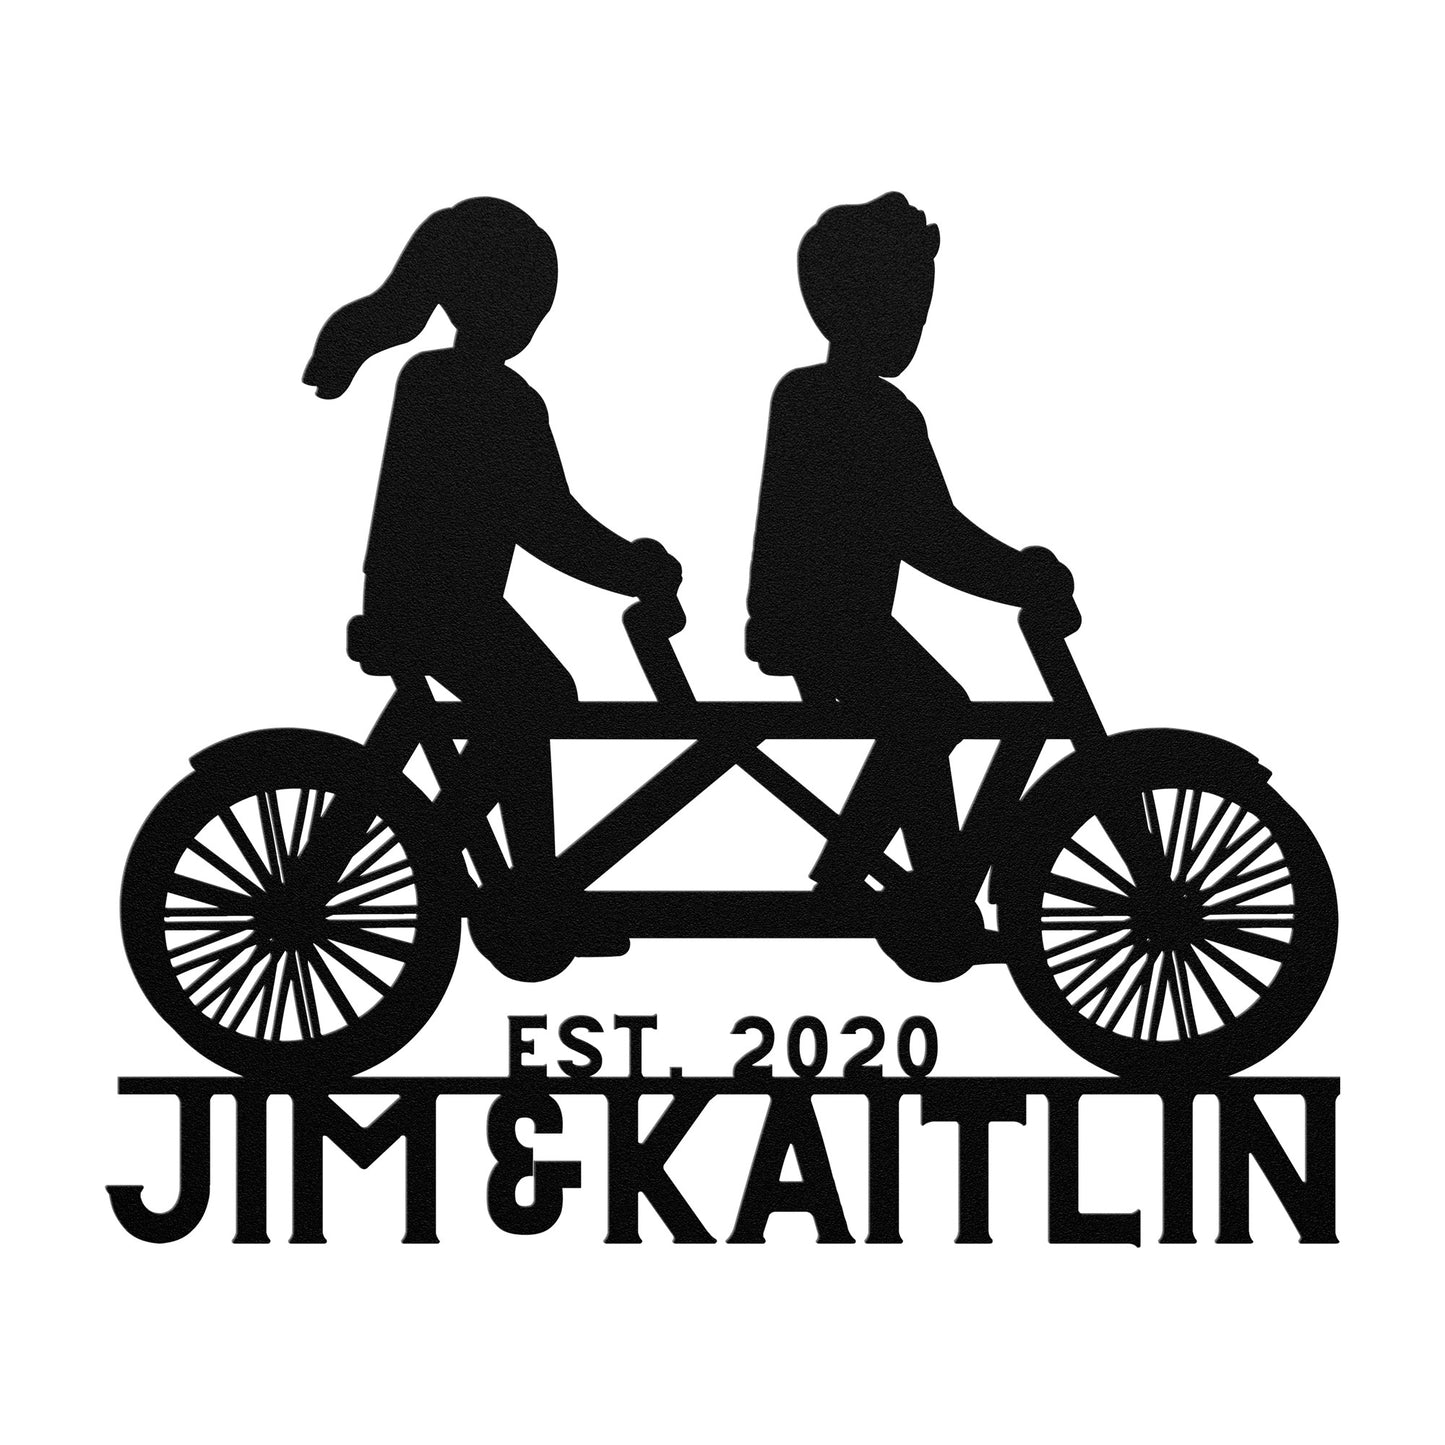 A powder coated silhouette of the "Couple Cycle on Tandem Bike Metal Wall Art" by teelaunch, perfect for home decor.